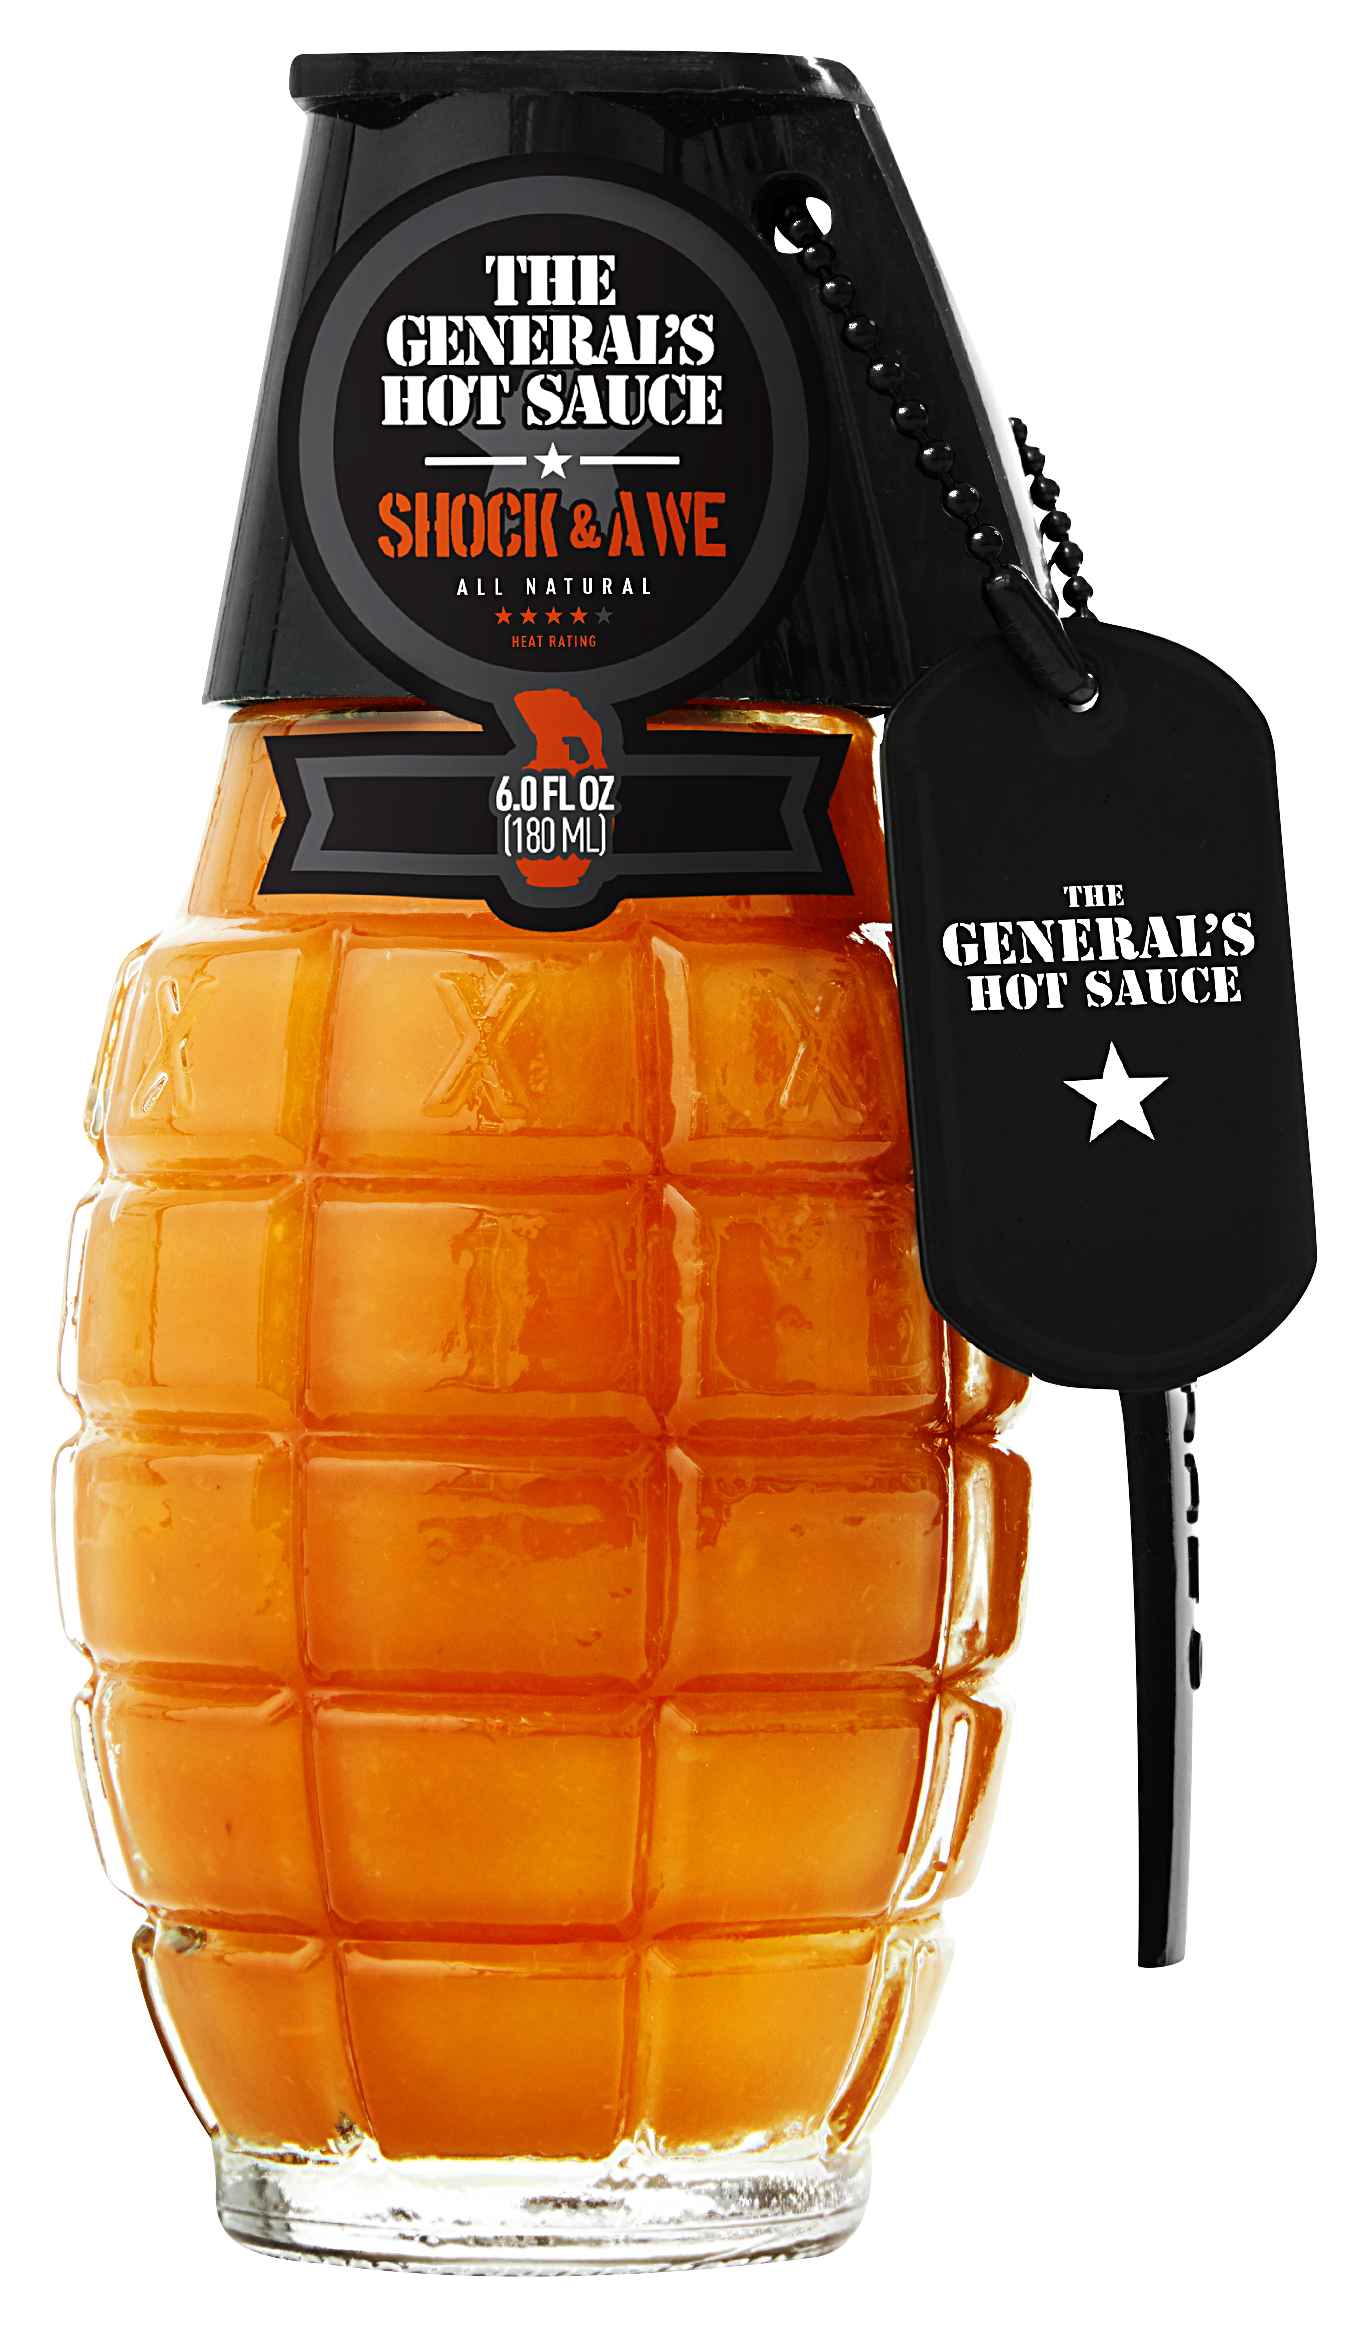 The General's Hot Sauce Shock and Awe Hot Sauce